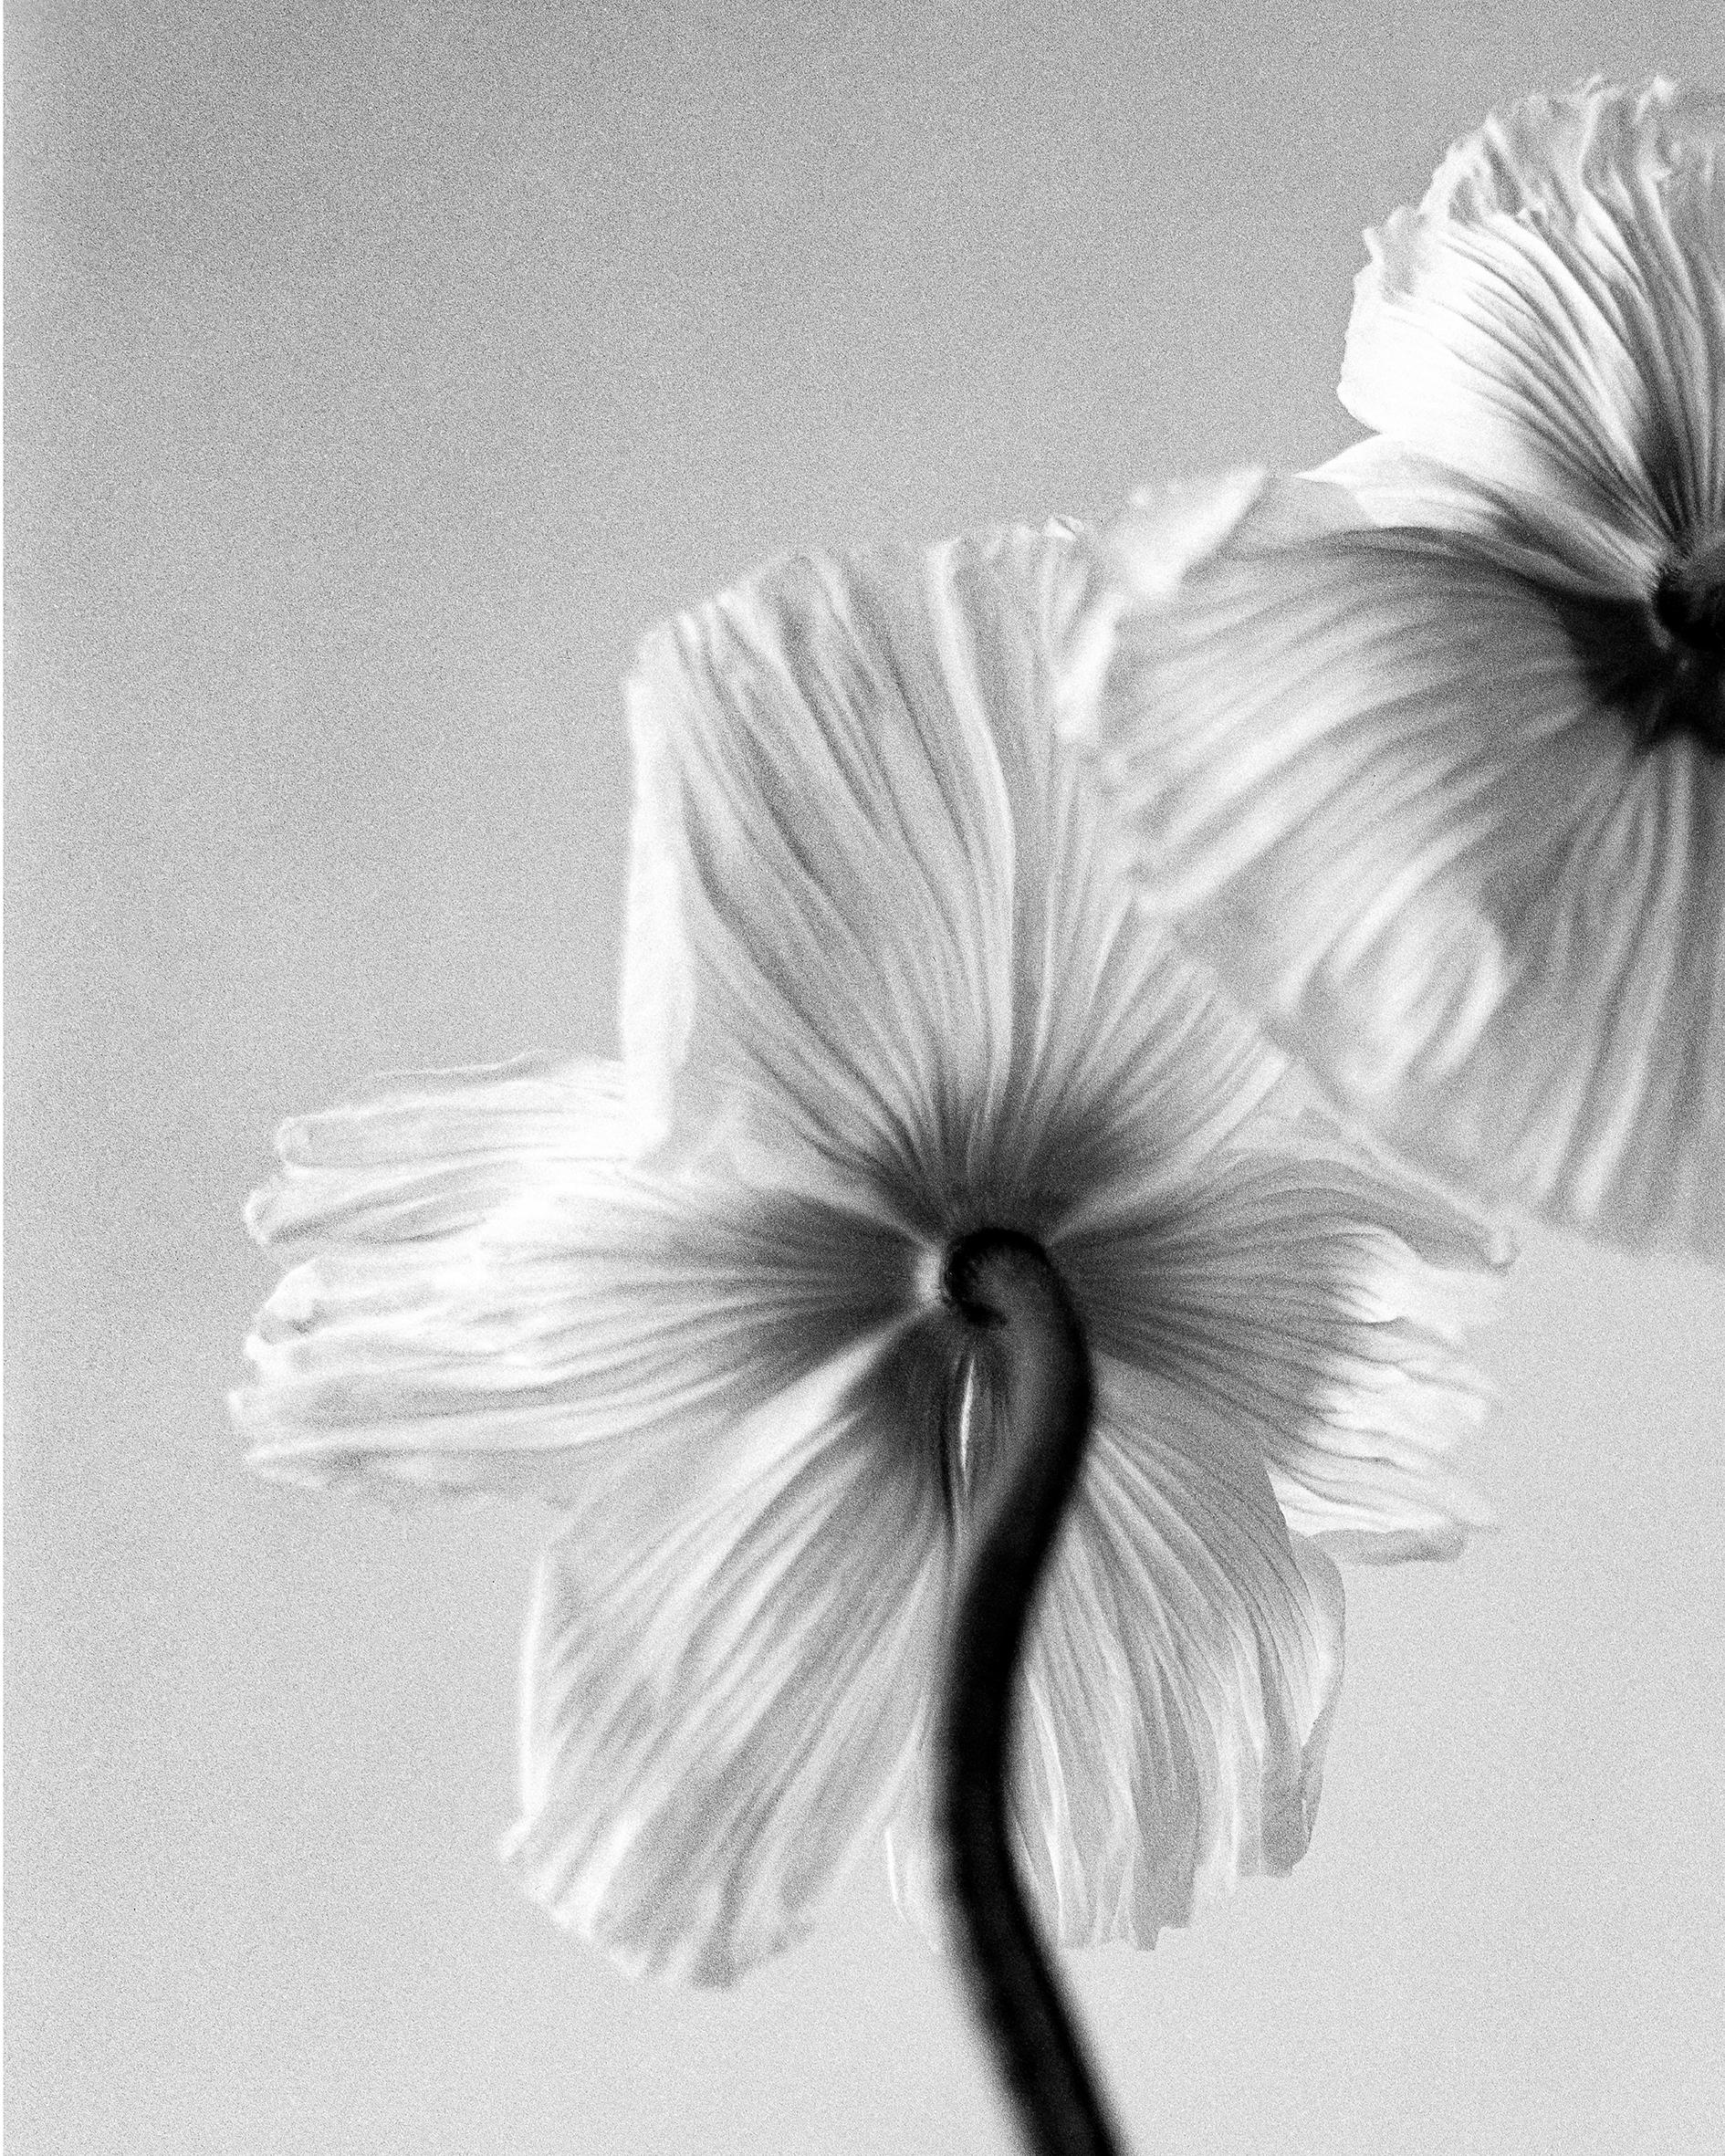 Three poppies - black and white floral photography, limited edition of 20 - Photograph by Ugne Pouwell